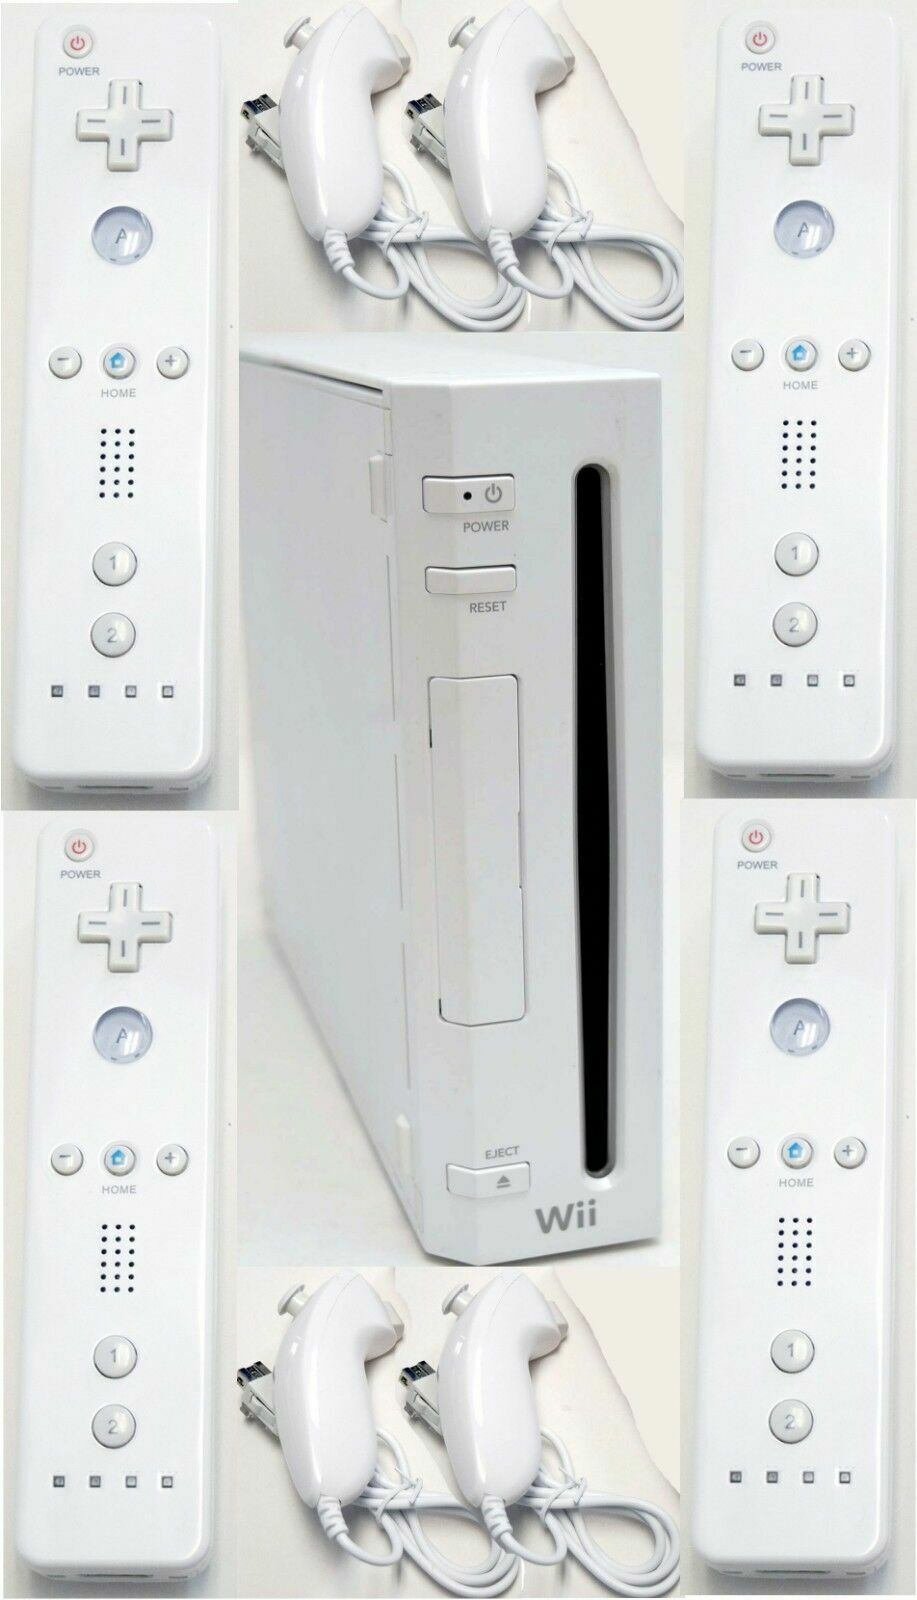 Primary image for eBay Refurbished 
4-REMOTE Nintendo Wii Video Game System ULTIMATE FAMILY BUN...